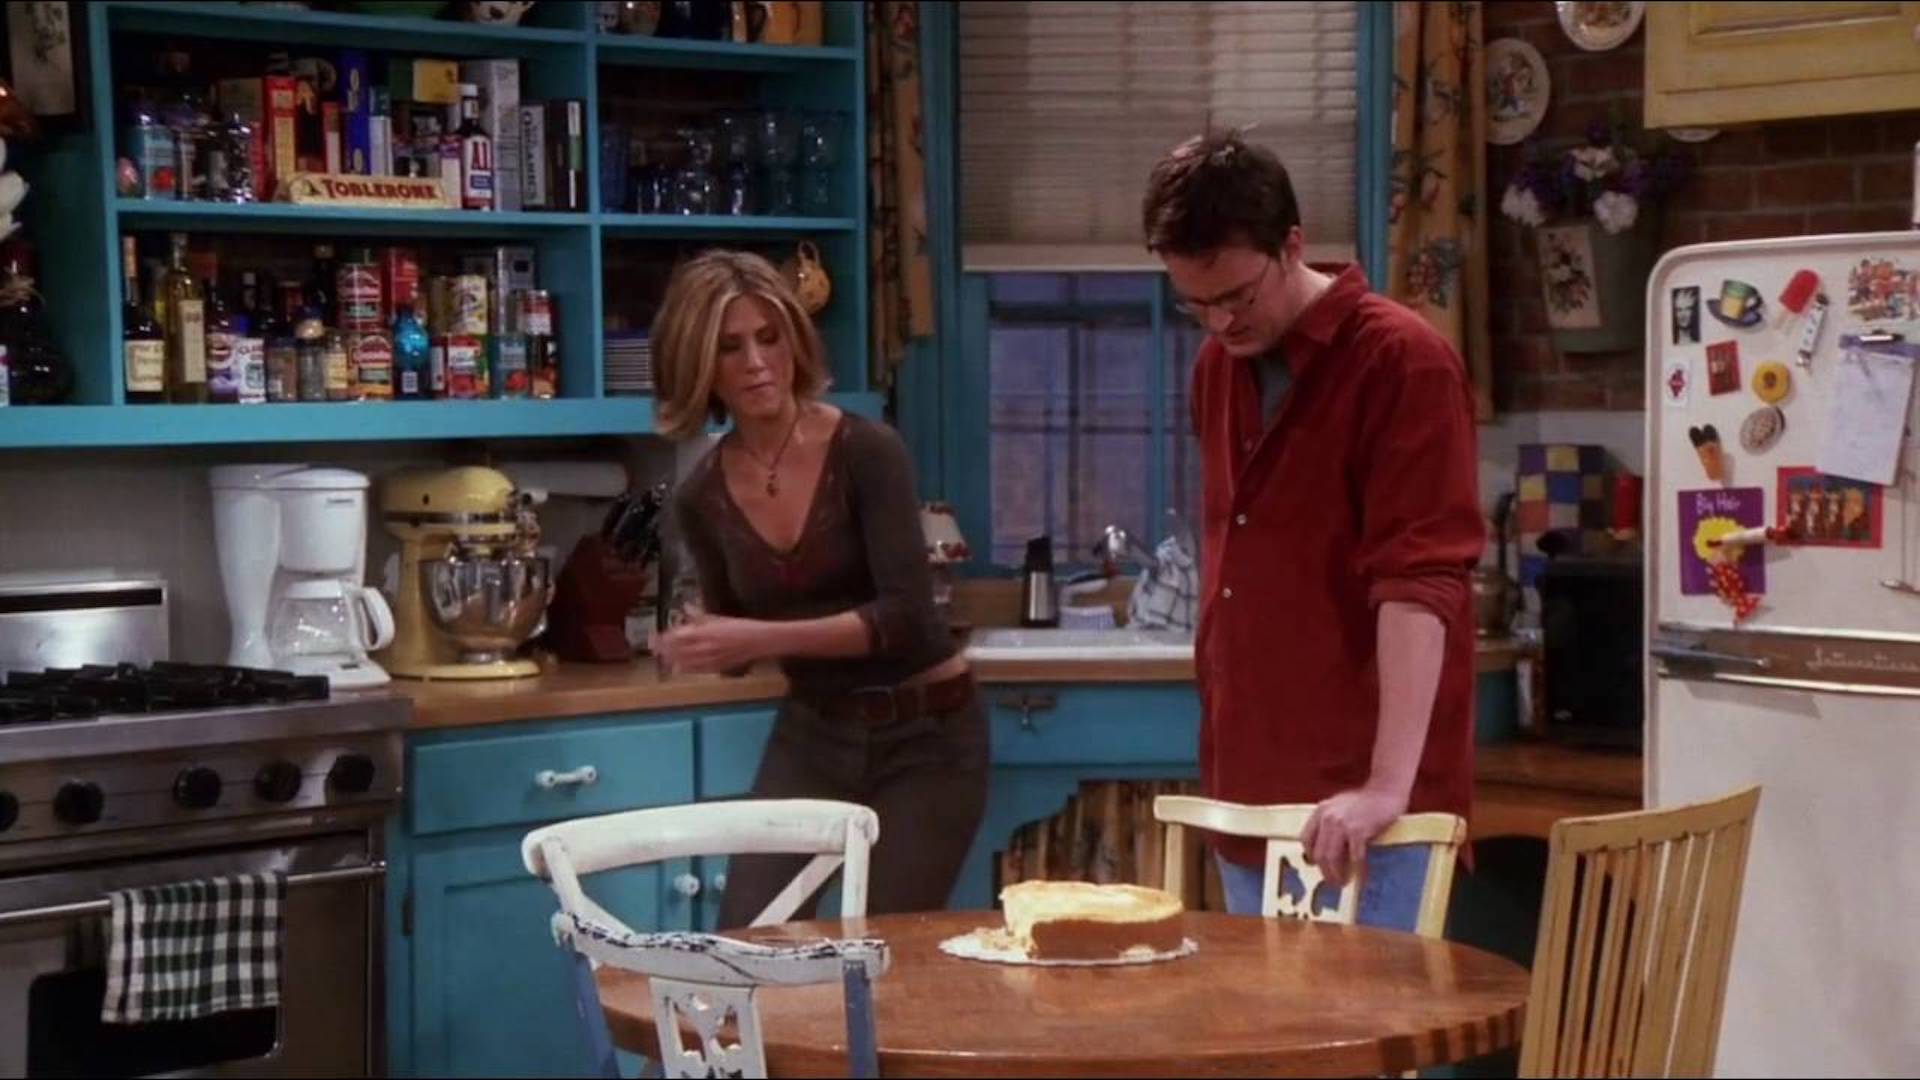 Chandler and Rachel stare at a cake